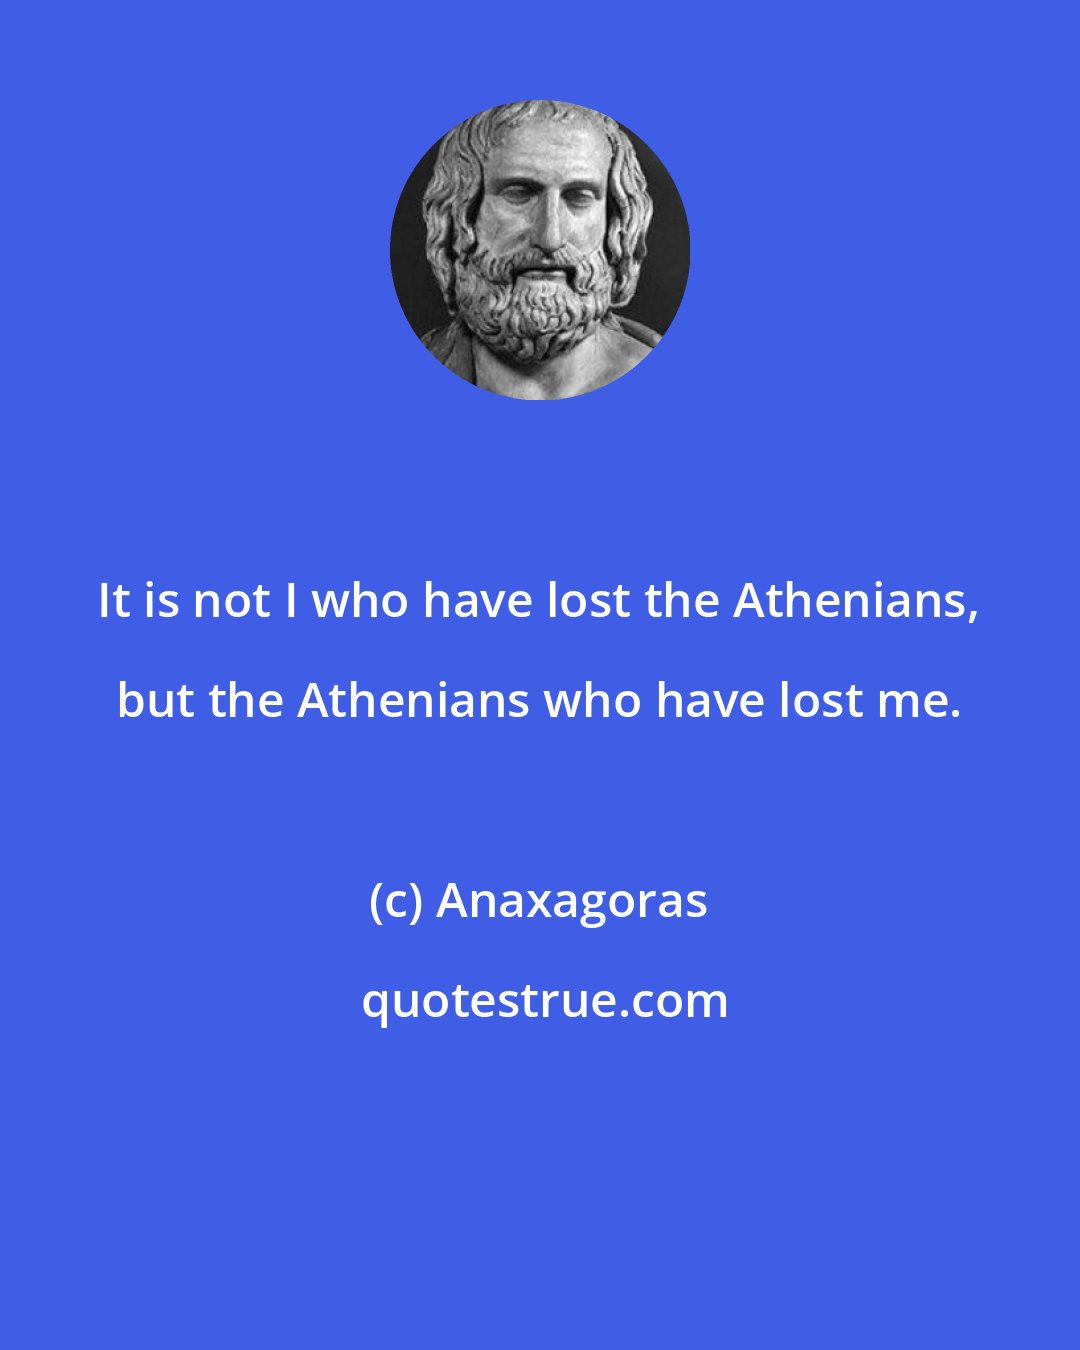 Anaxagoras: It is not I who have lost the Athenians, but the Athenians who have lost me.